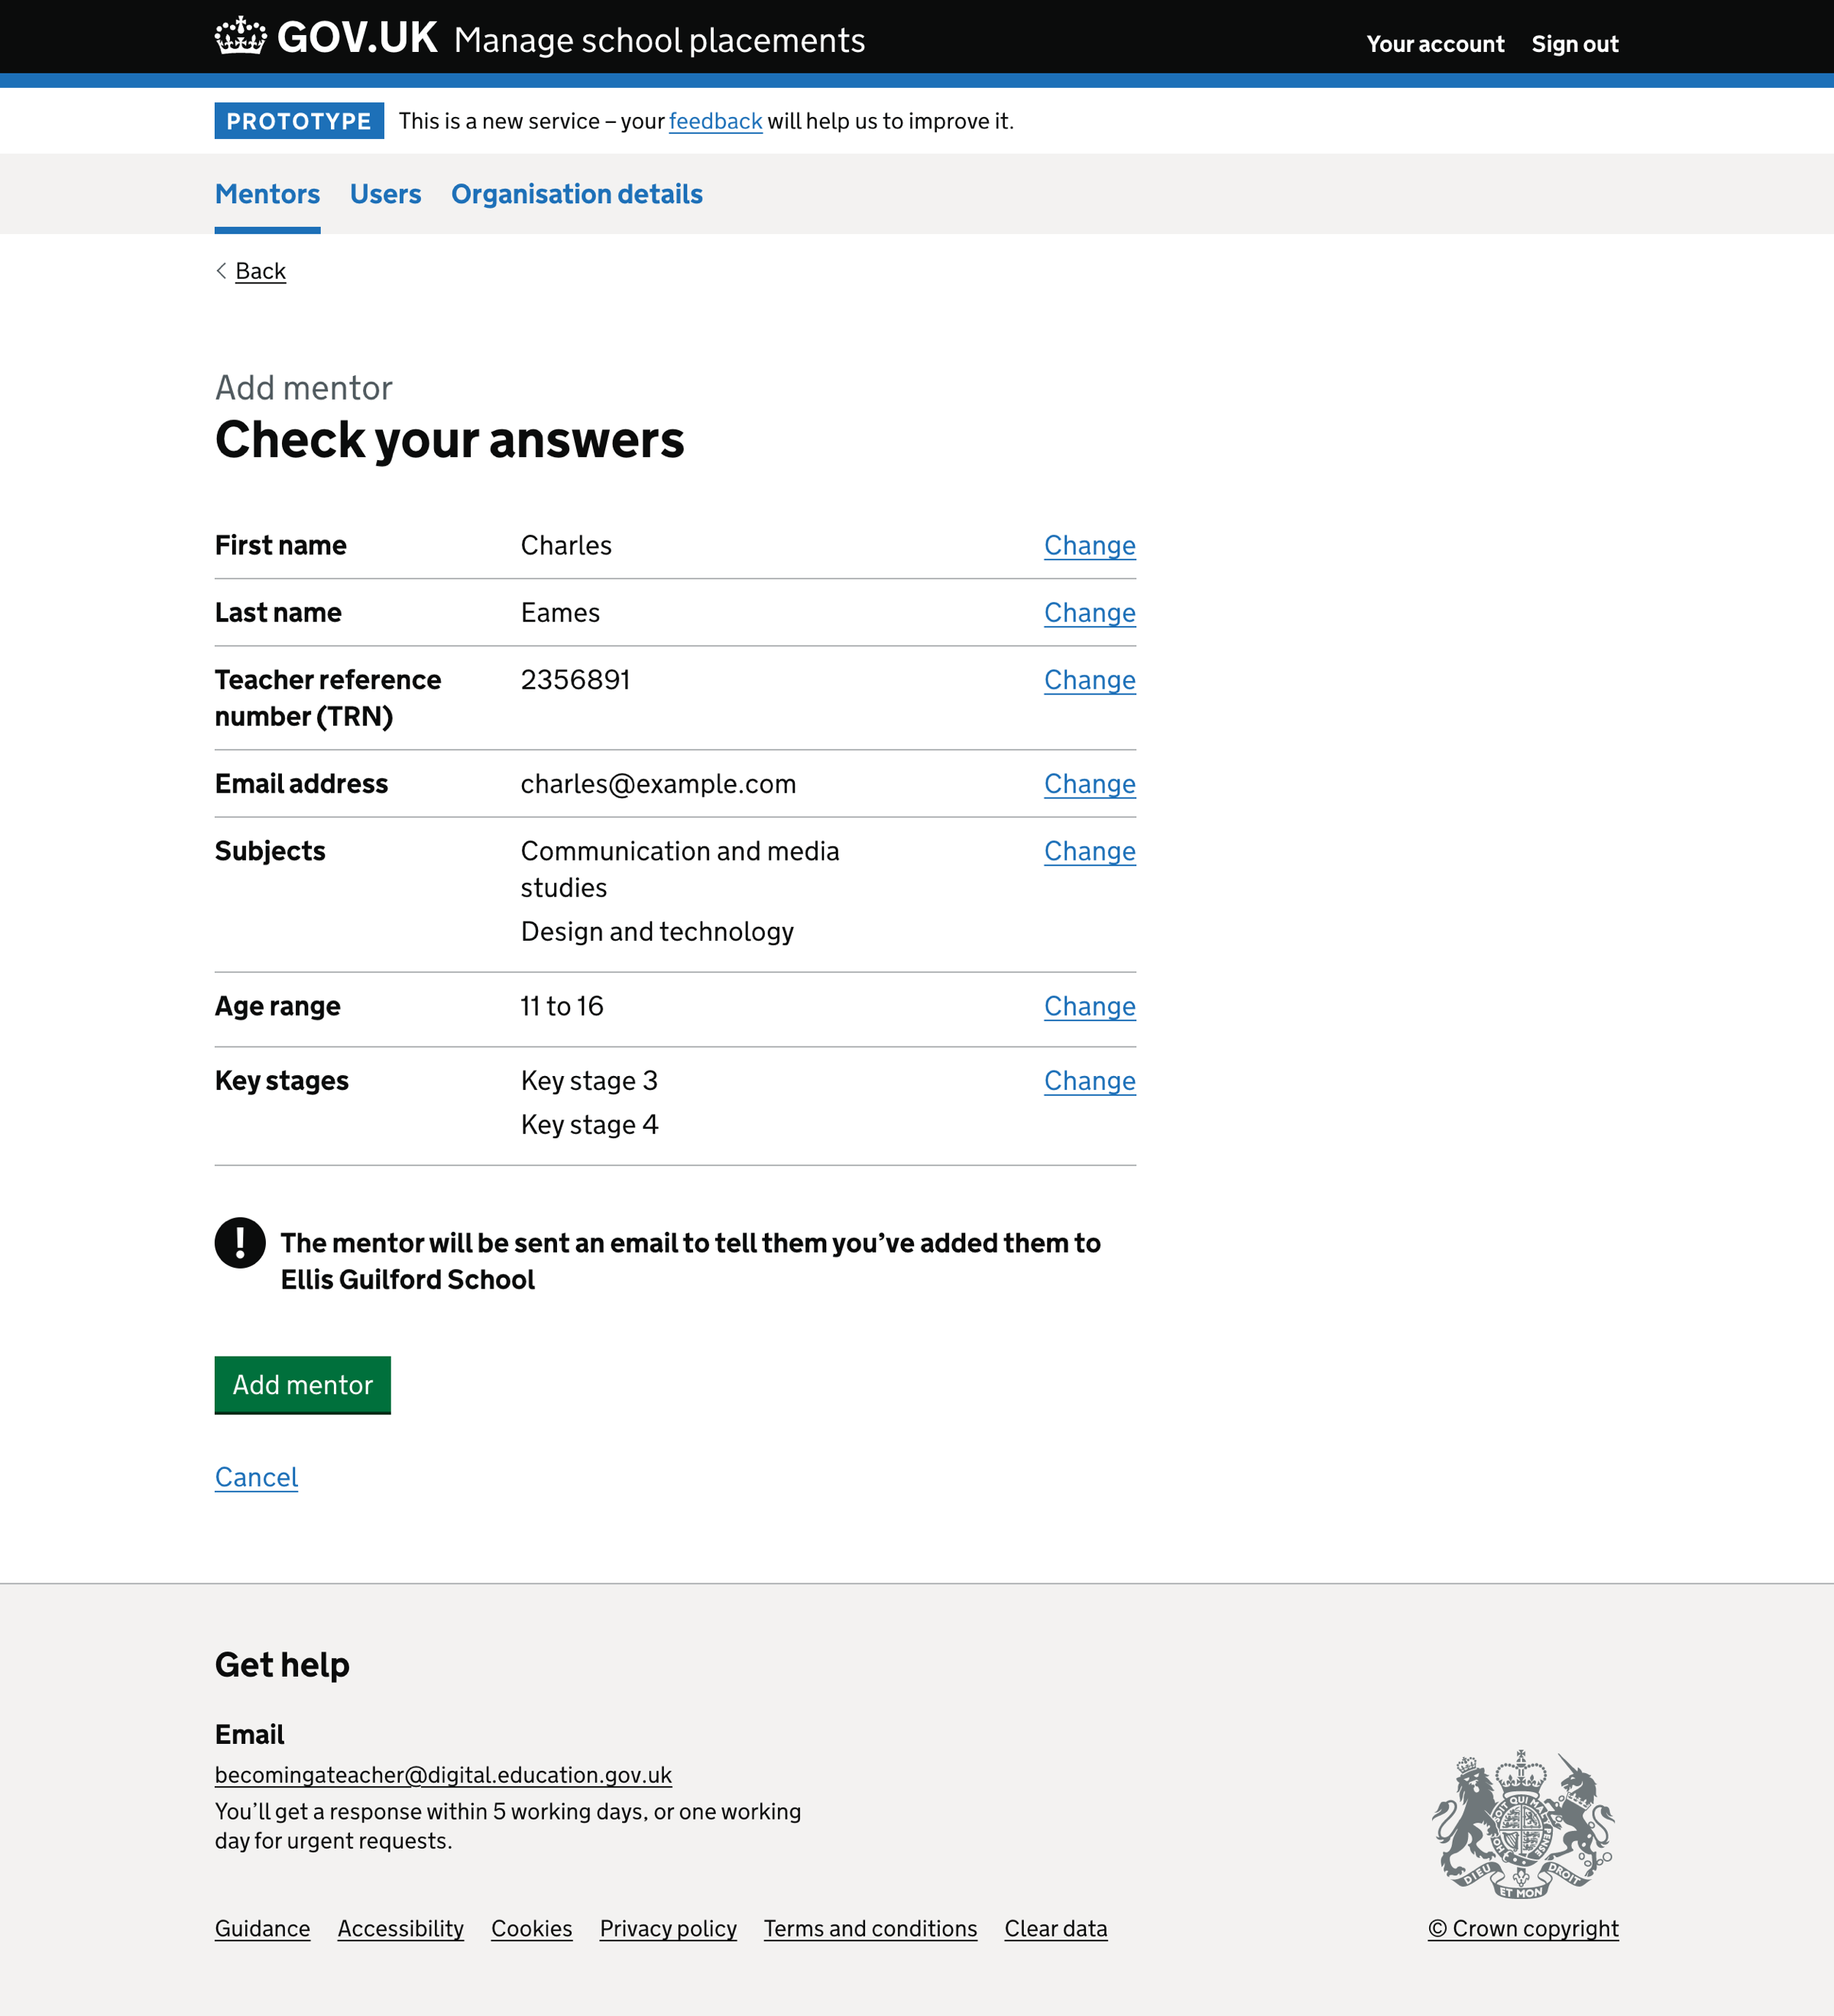 Image showing check your answers page